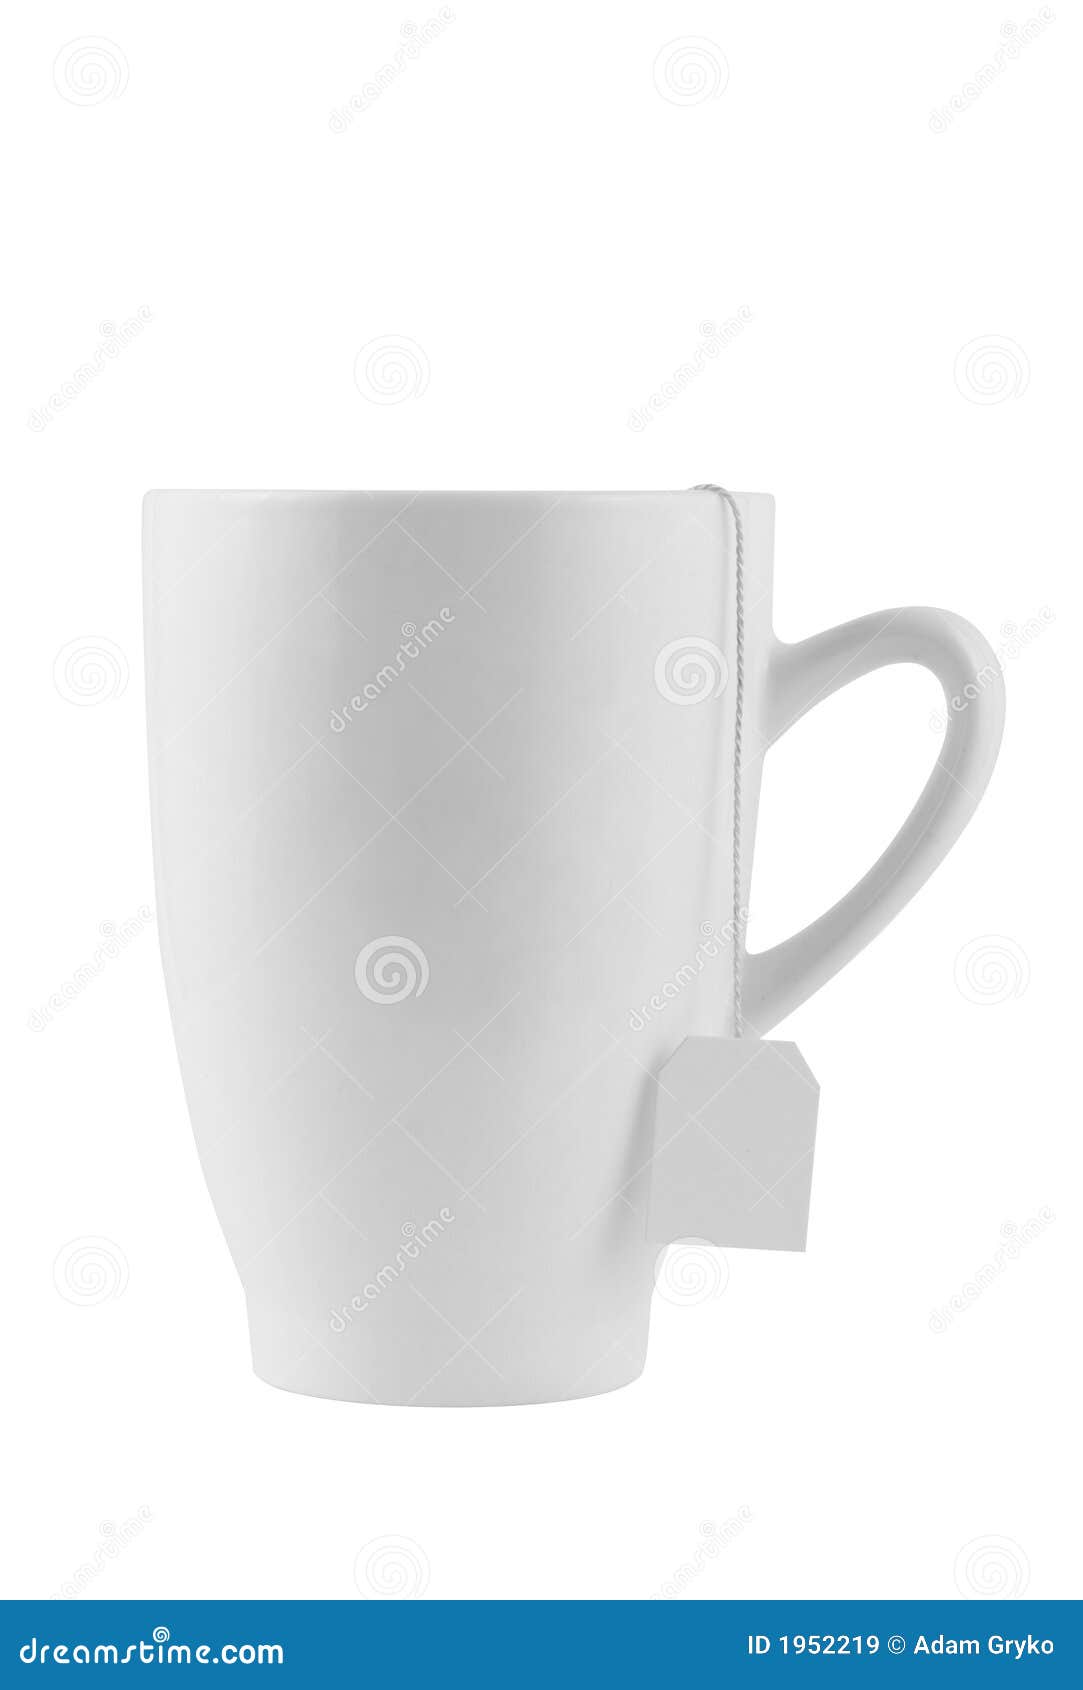 White Cup Royalty Free Stock Images - Image: 1952219